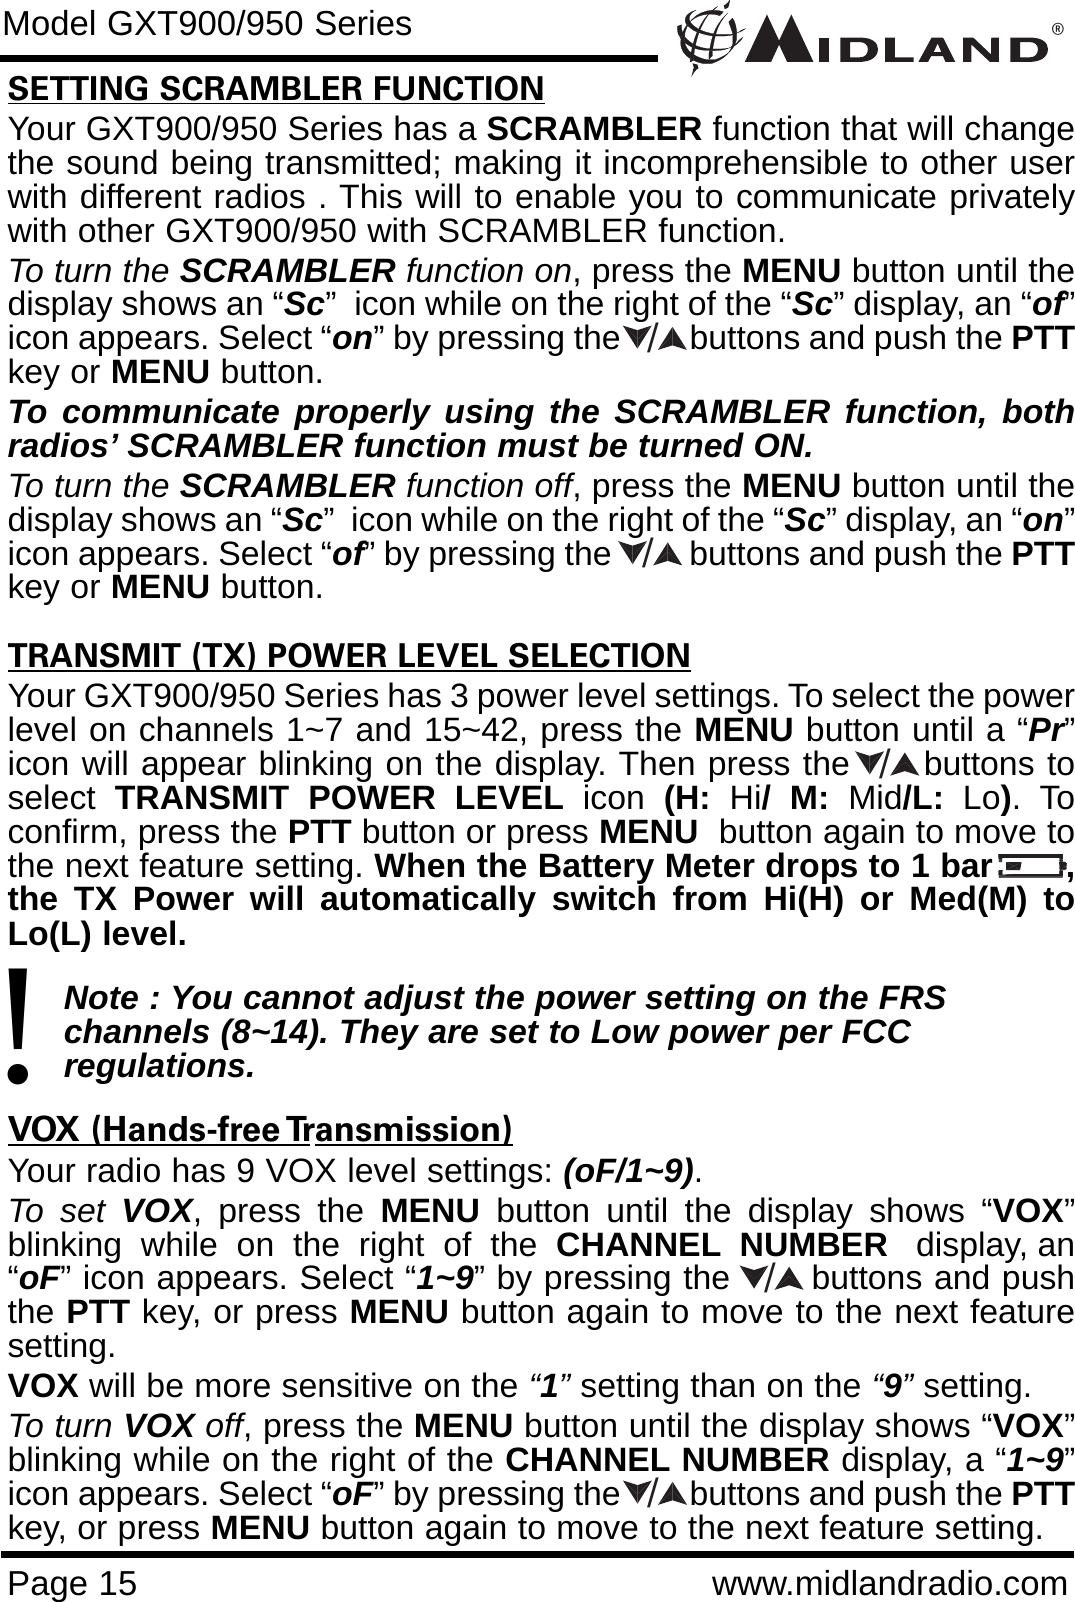 ®Page 15 www.midlandradio.comSETTING SCRAMBLER FUNCTIONYour GXT900/950 Series has a SCRAMBLER function that will changethe sound being transmitted; making it incomprehensible to other userwith different radios . This will to enable you to communicate privatelywith other GXT900/950 with SCRAMBLER function. To turn the SCRAMBLER function on, press the MENU button until thedisplay shows an “Sc”  icon while on the right of the “Sc” display, an “of”icon appears. Select “on” by pressing the        buttons and push the PTTkey or MENU button. To communicate properly using the SCRAMBLER function, bothradios’ SCRAMBLER function must be turned ON.To turn the SCRAMBLER function off, press the MENU button until thedisplay shows an “Sc”  icon while on the right of the “Sc” display, an “on”icon appears. Select “of” by pressing the         buttons and push the PTTkey or MENU button.TRANSMIT (TX) POWER LEVEL SELECTIONYour GXT900/950 Series has 3 power level settings. To select the powerlevel on channels 1~7 and 15~42, press the MENU button until a “Pr”icon will appear blinking on the display. Then press the      buttons toselect  TRANSMIT POWER LEVEL icon  (H:  Hi/ M: Mid/L:  Lo). Toconfirm, press the PTT button or press MENU button again to move tothe next feature setting. When the Battery Meter drops to 1 bar       ,the TX Power will automatically switch from Hi(H) or Med(M) toLo(L) level.Note : You cannot adjust the power setting on the FRS   channels (8~14). They are set to Low power per FCC          regulations.VOX (Hands-free Transmission)Your radio has 9 VOX level settings: (oF/1~9).To set VOX, press the MENU button until the display shows “VOX”blinking  while  on  the  right  of  the  CHANNEL NUMBER display, an“oF” icon appears. Select “1~9” by pressing the       buttons and pushthe PTT key, or press MENU button again to move to the next featuresetting.  VOX will be more sensitive on the “1”setting than on the “9”setting.To turn VOX off, press the MENU button until the display shows “VOX”blinking while on the right of the CHANNEL NUMBER display, a “1~9”icon appears. Select “oF” by pressing the        buttons and push the PTTkey, or press MENU button again to move to the next feature setting.Model GXT900/950 Series!/////